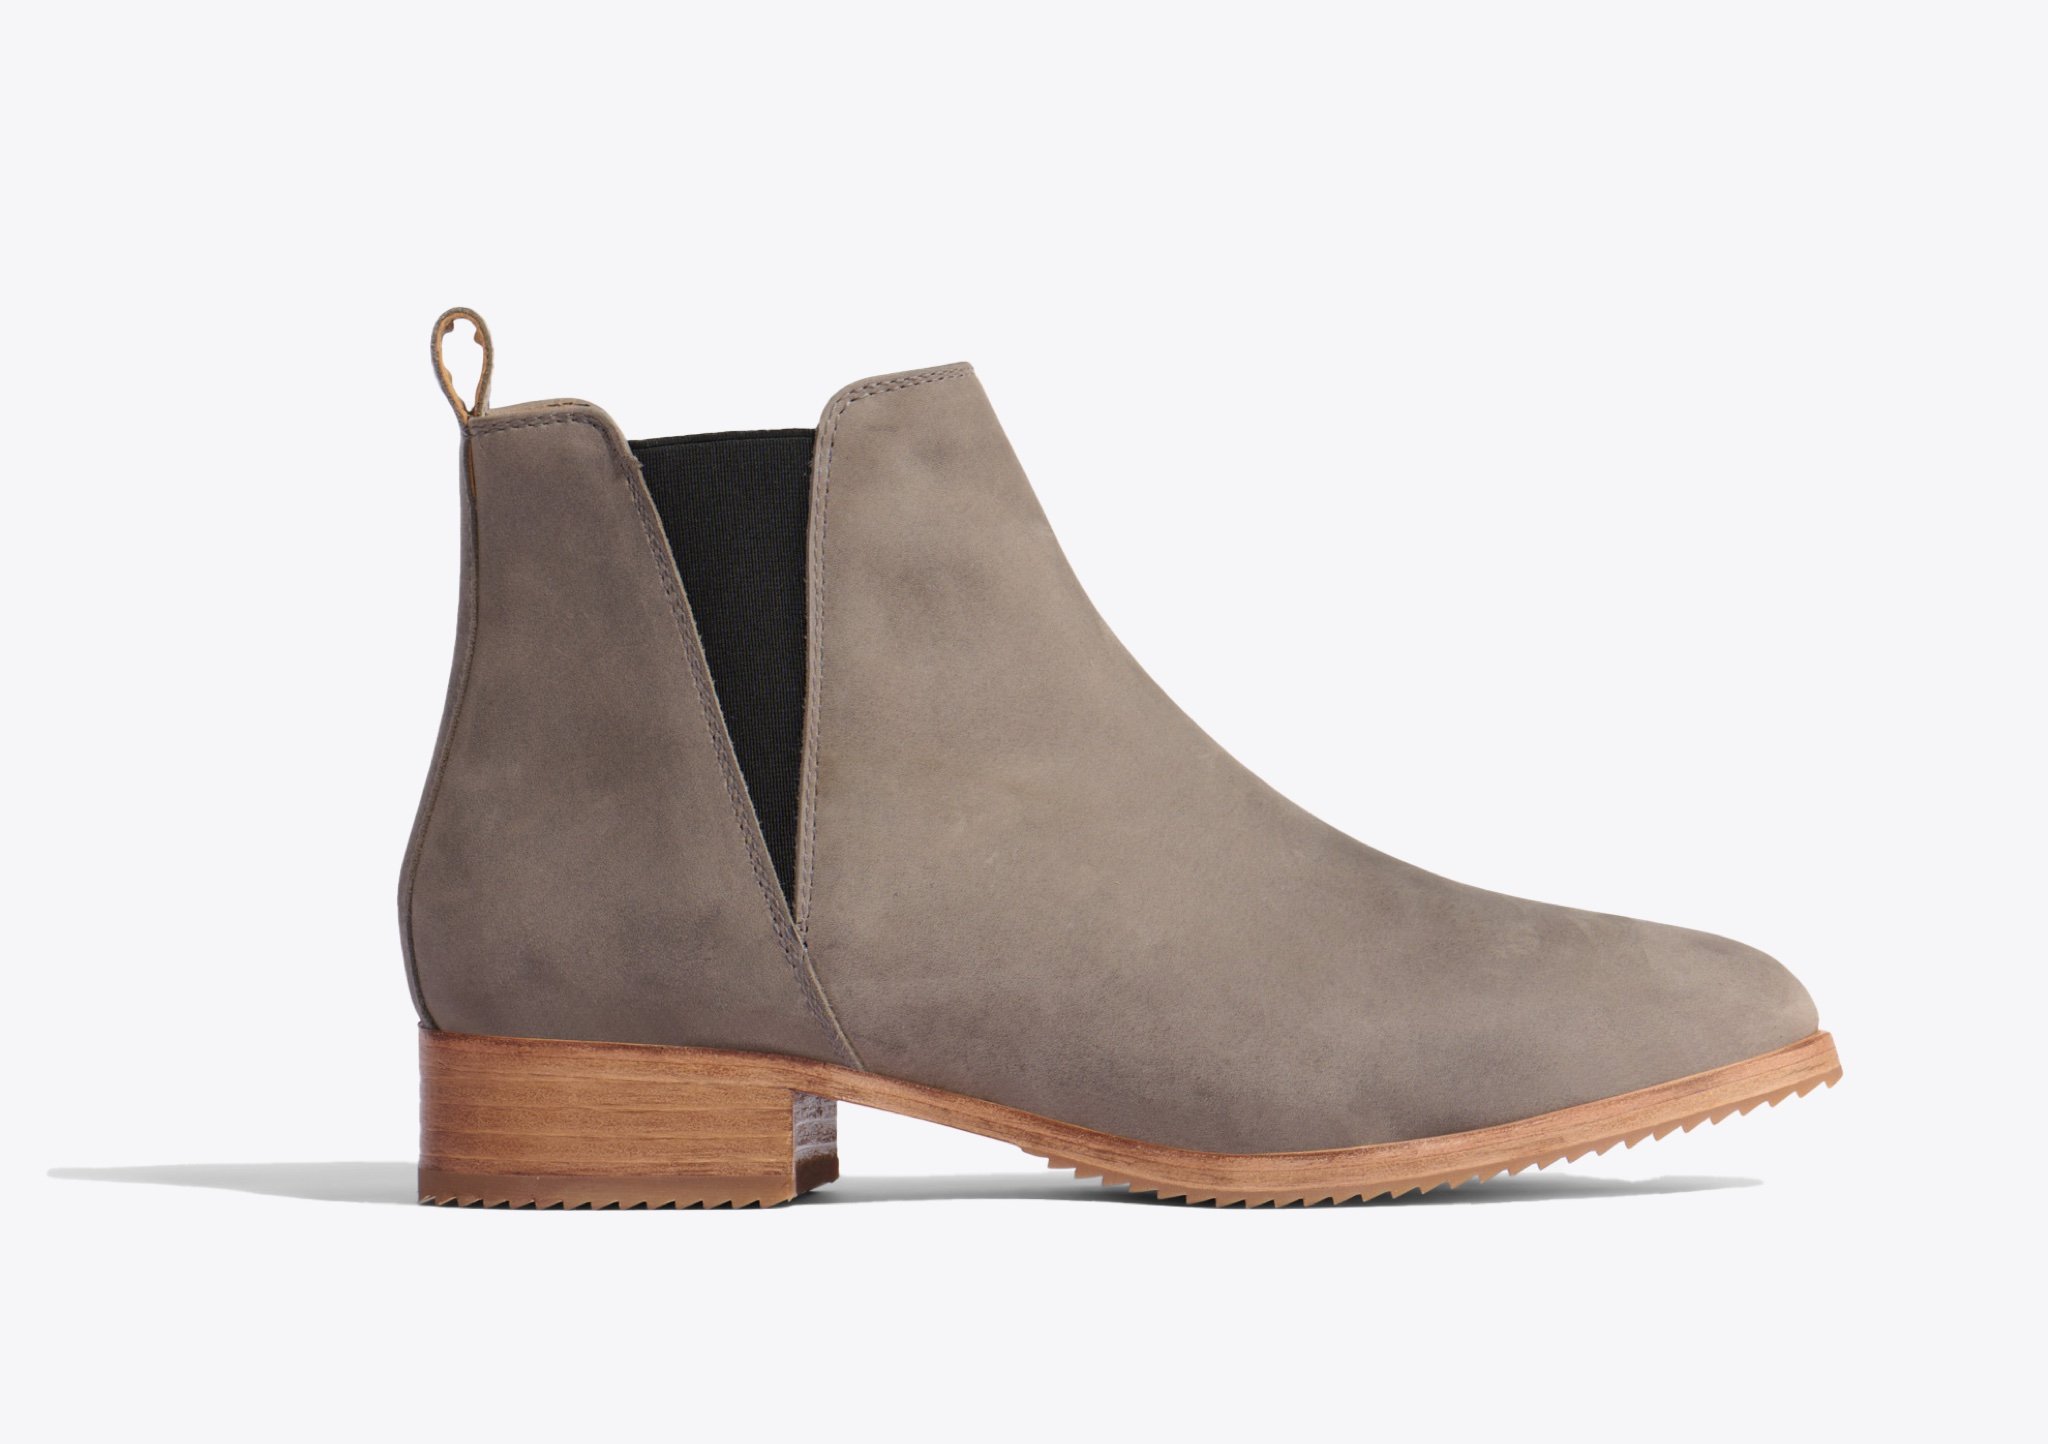 Nisolo Eva Everyday Chelsea Boot Grey - Every Nisolo product is built on the foundation of comfort, function, and design. 